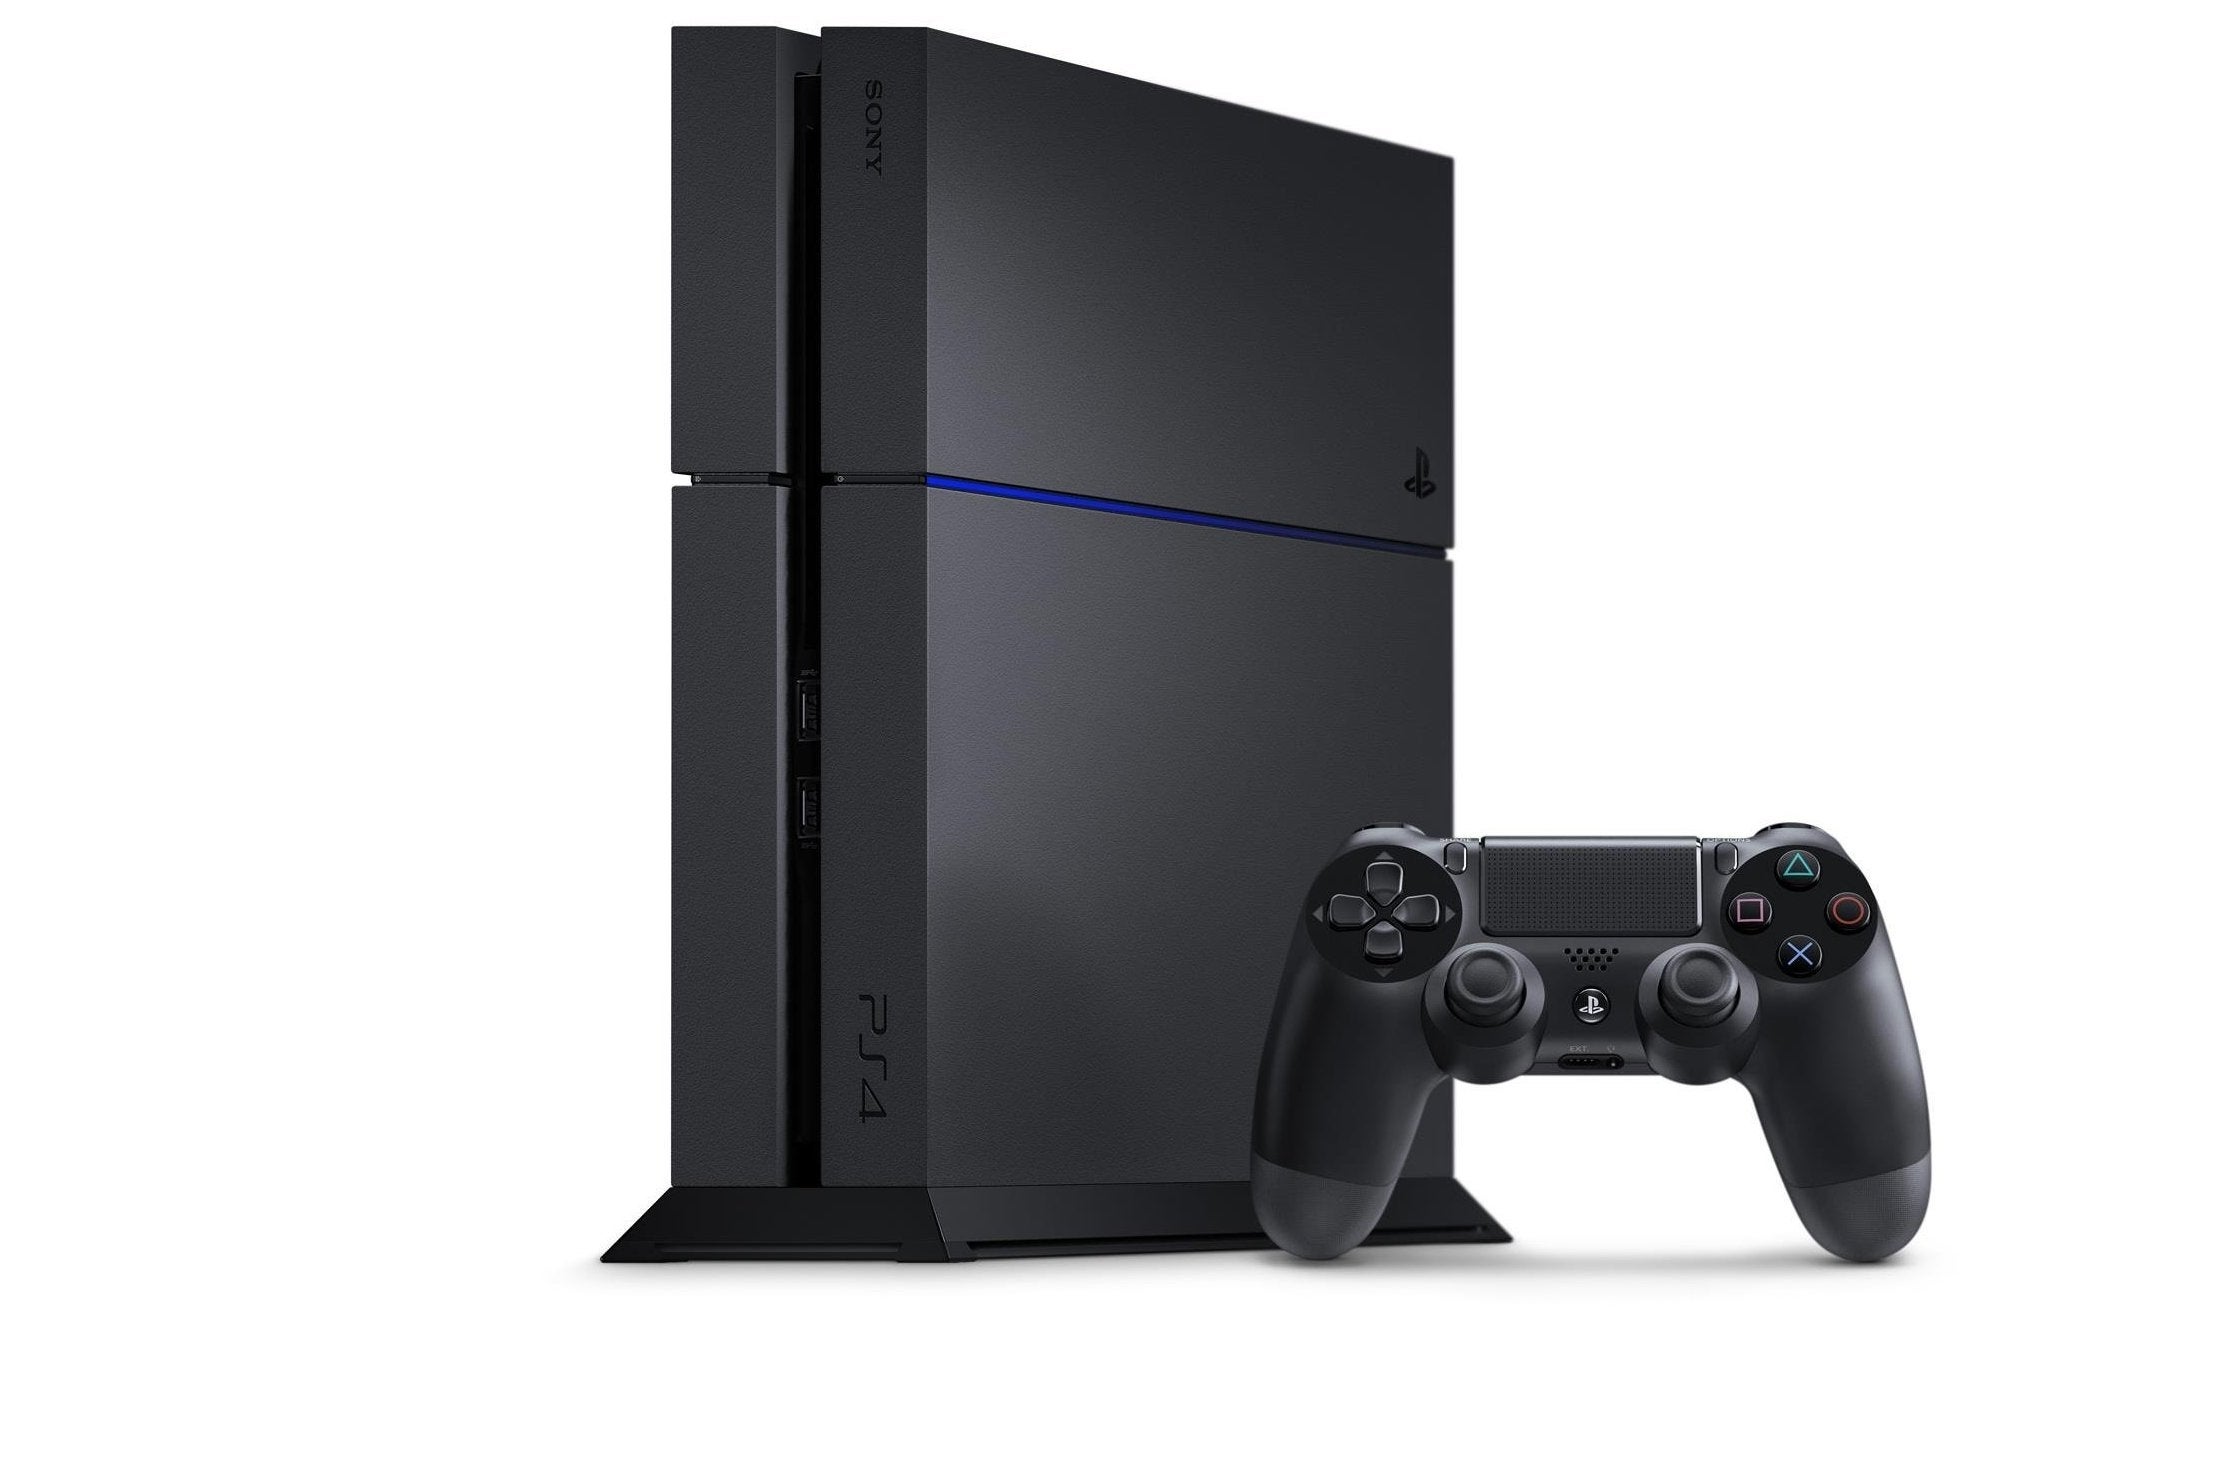 PlayStation 4 CUH-1200 'C-Chassis' review | Eurogamer.net